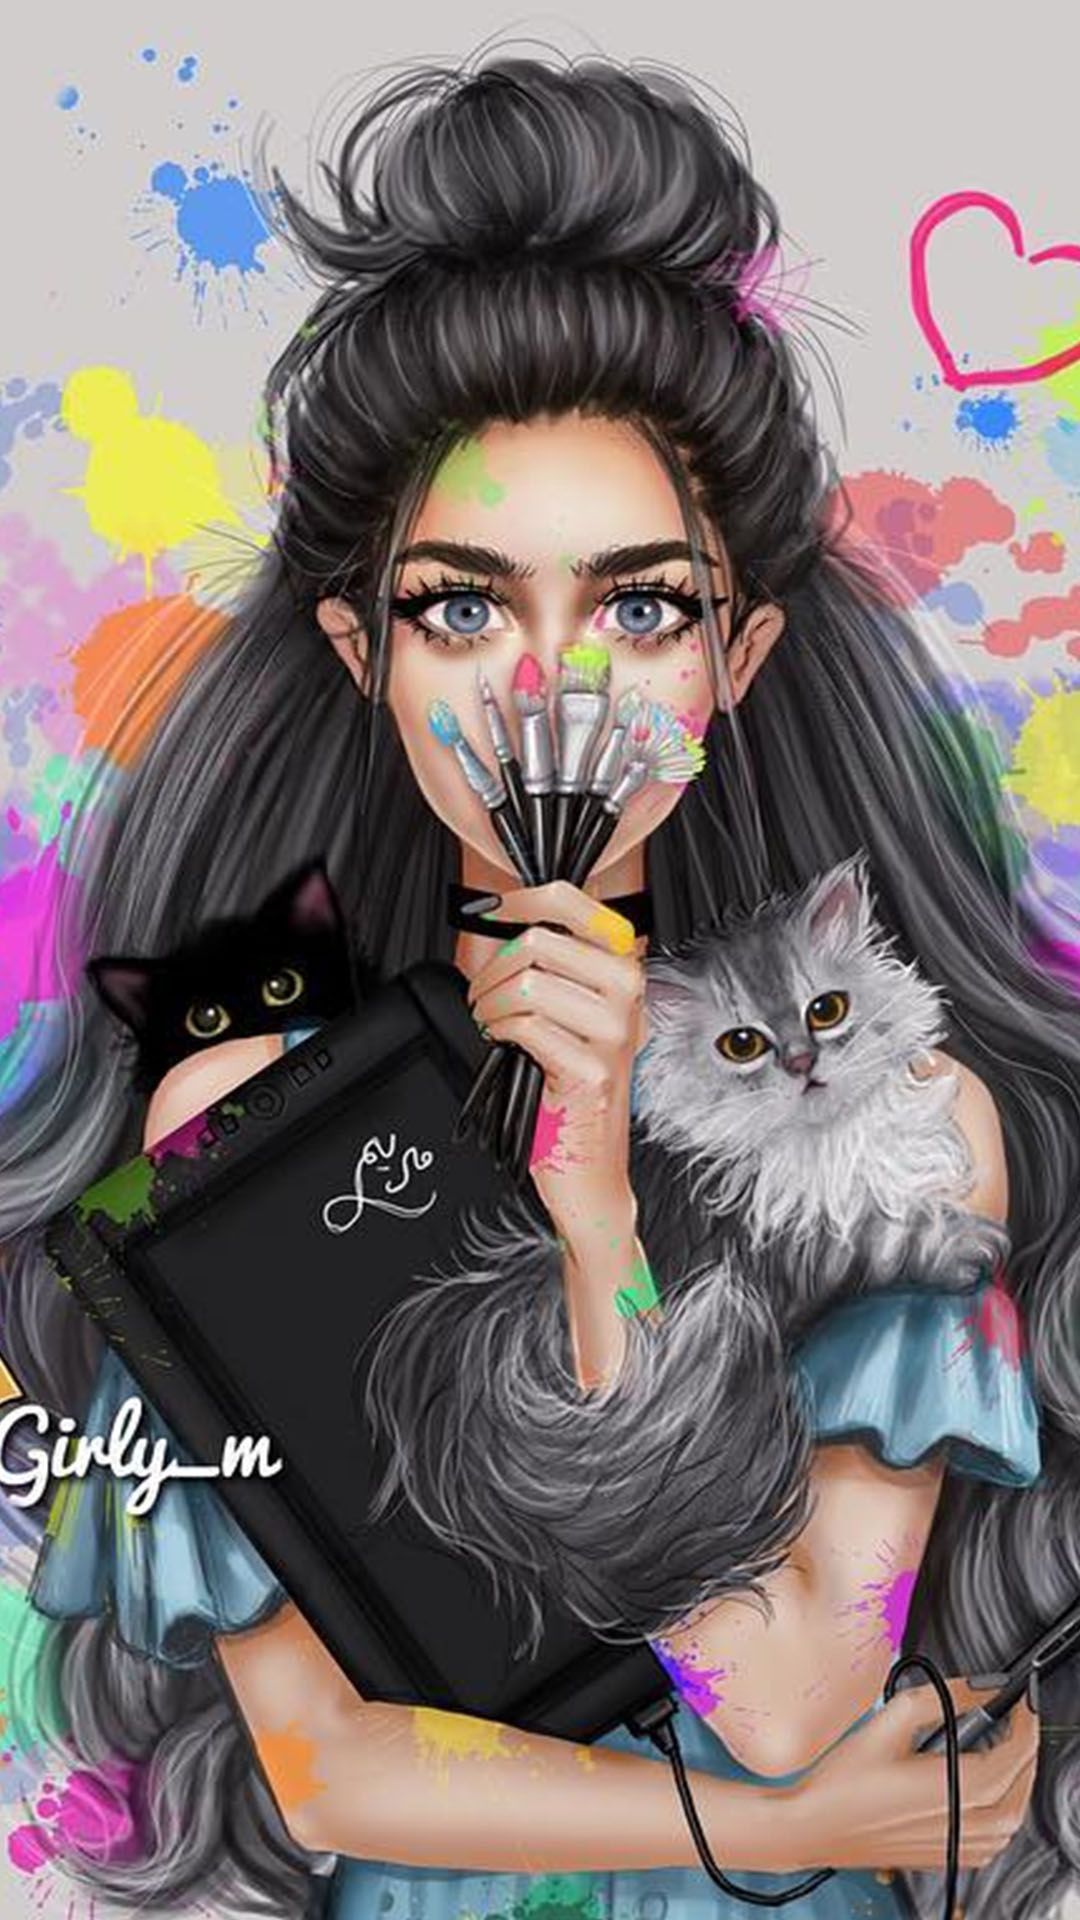 Downloaded From Wallpaper. App Id466993271. Thousands Of HD Wallpaper Just For You!. Girly Drawings, Girly Art, Sarra Art